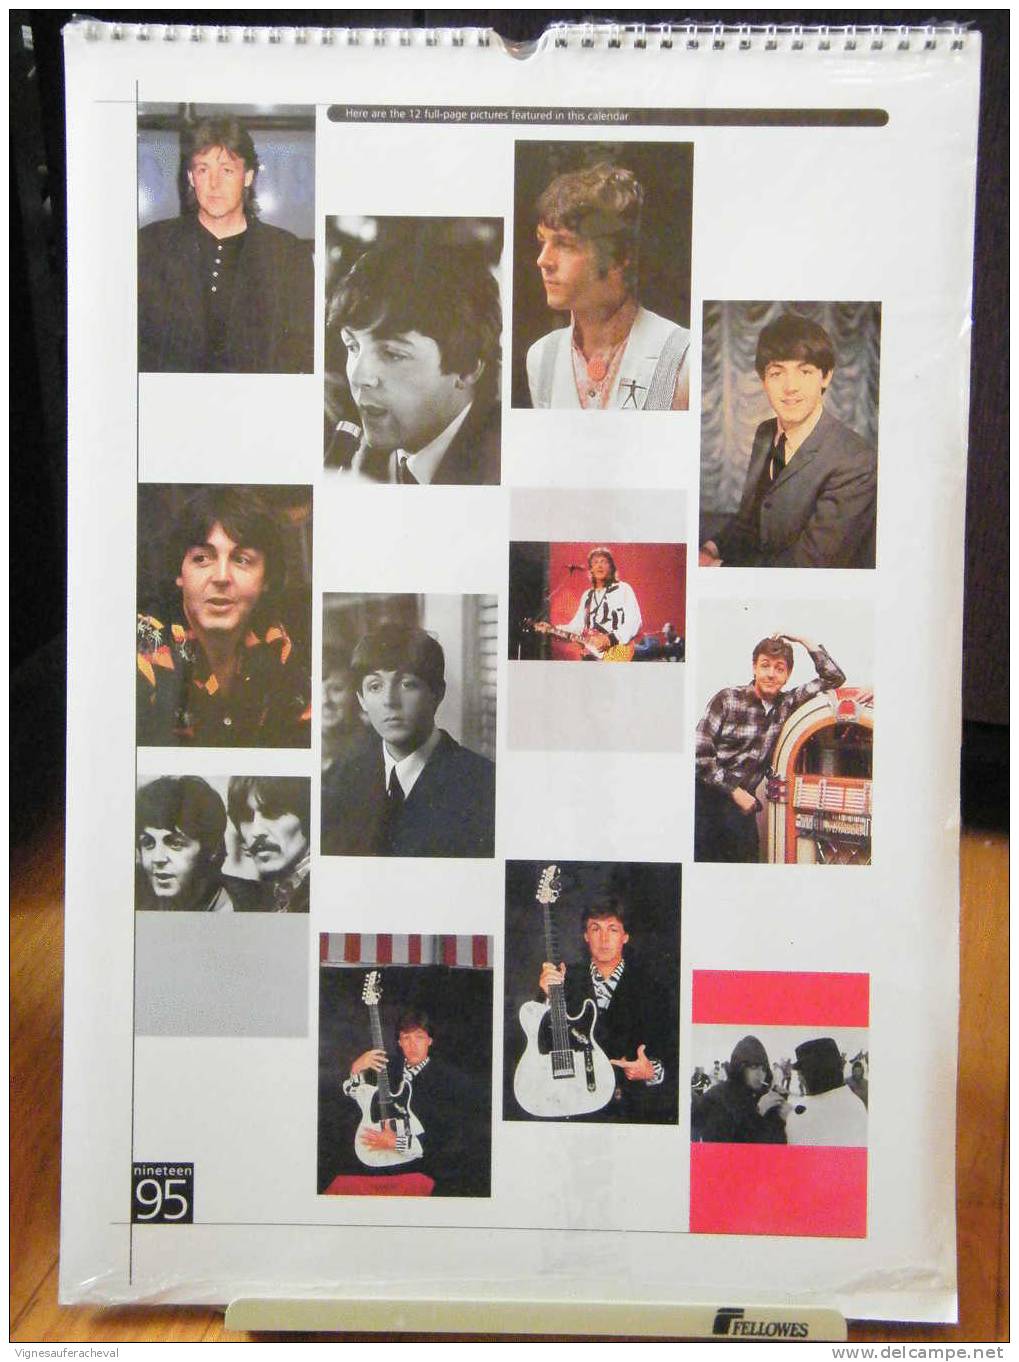 Calendriers Rock.Paul McCartney 1995 By  Oliver Books - Plakate & Poster